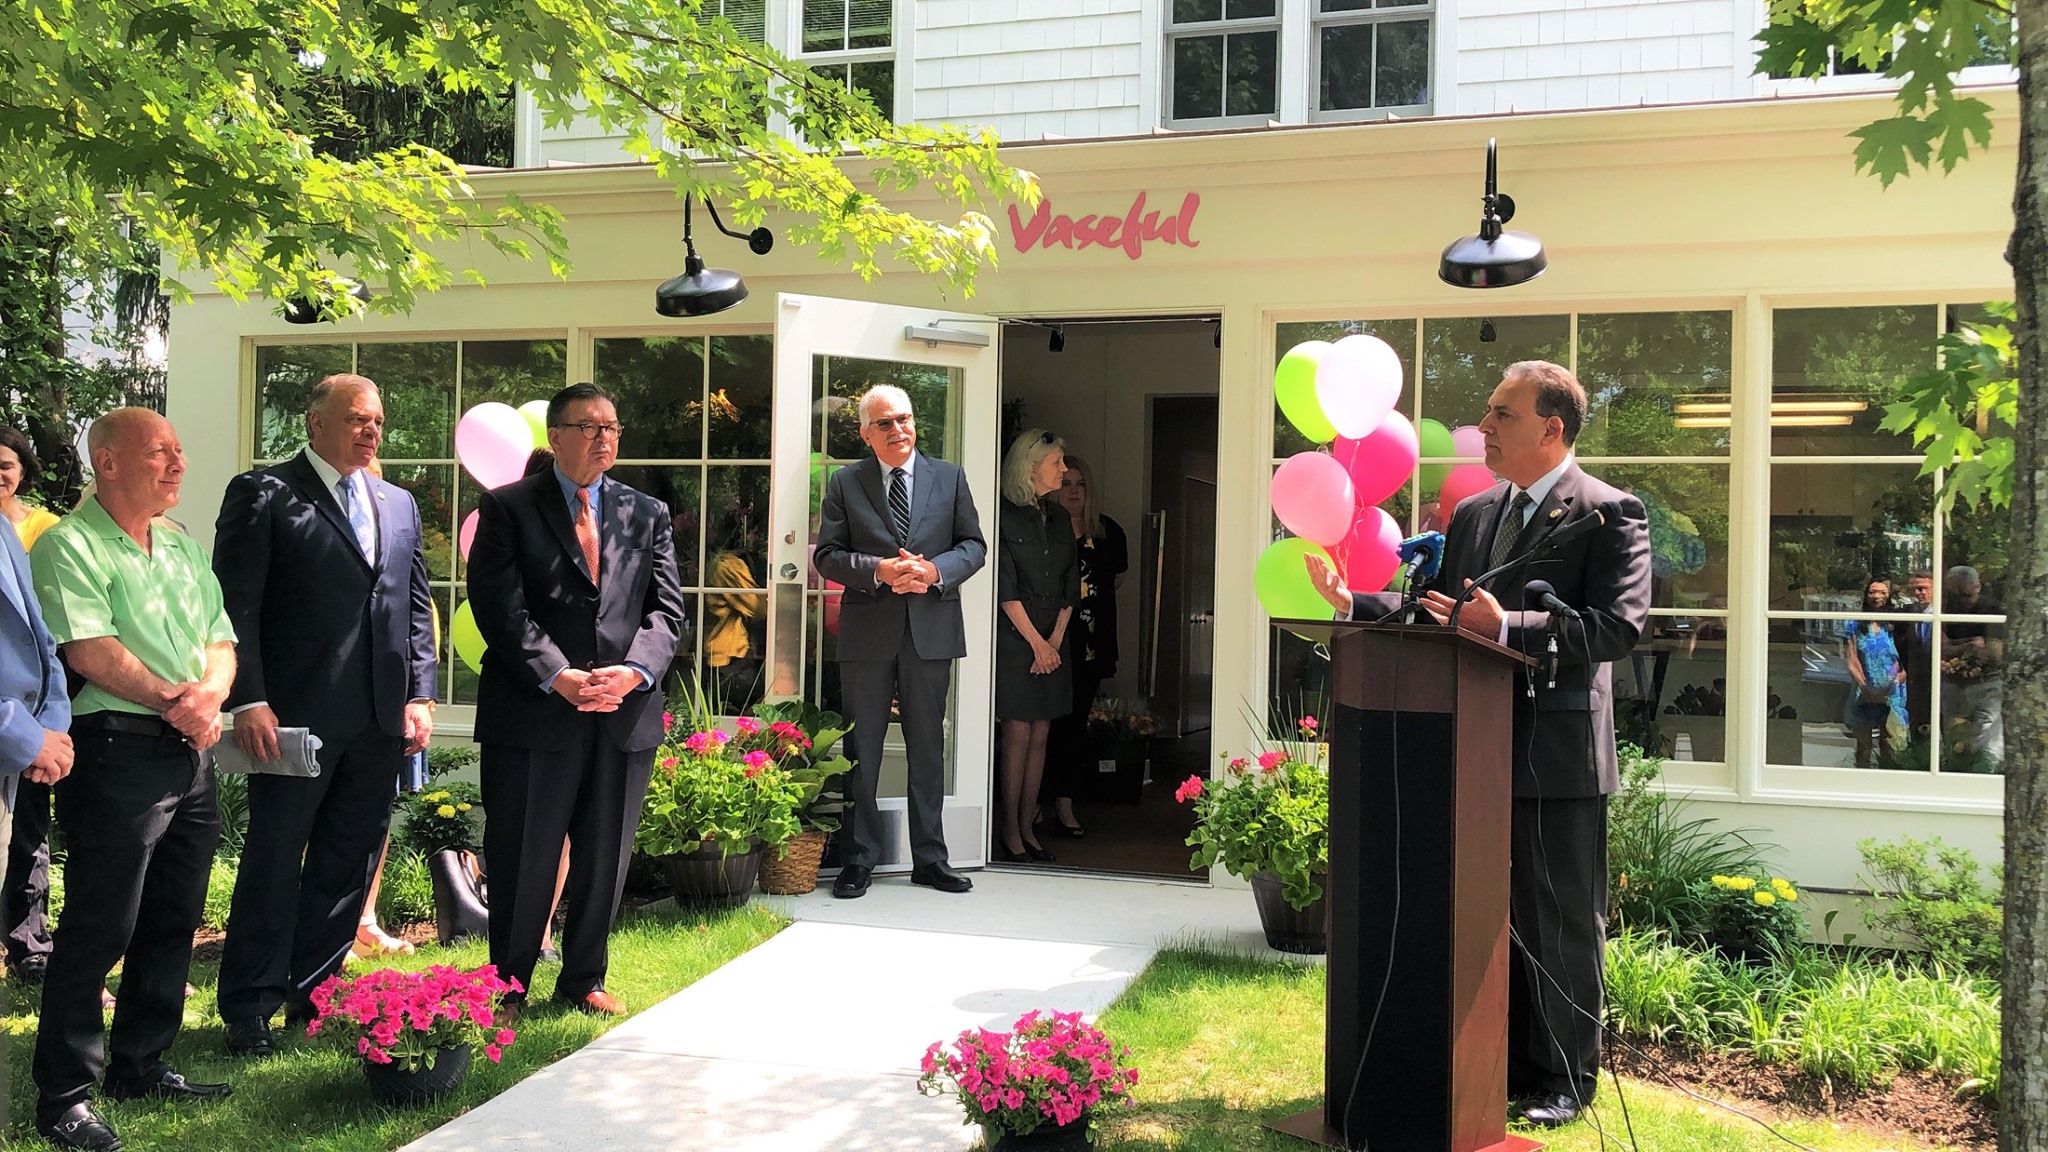 We held a ribbon cutting to celebrate the opening of our second store location! Come visit us in Princeton at our new location.